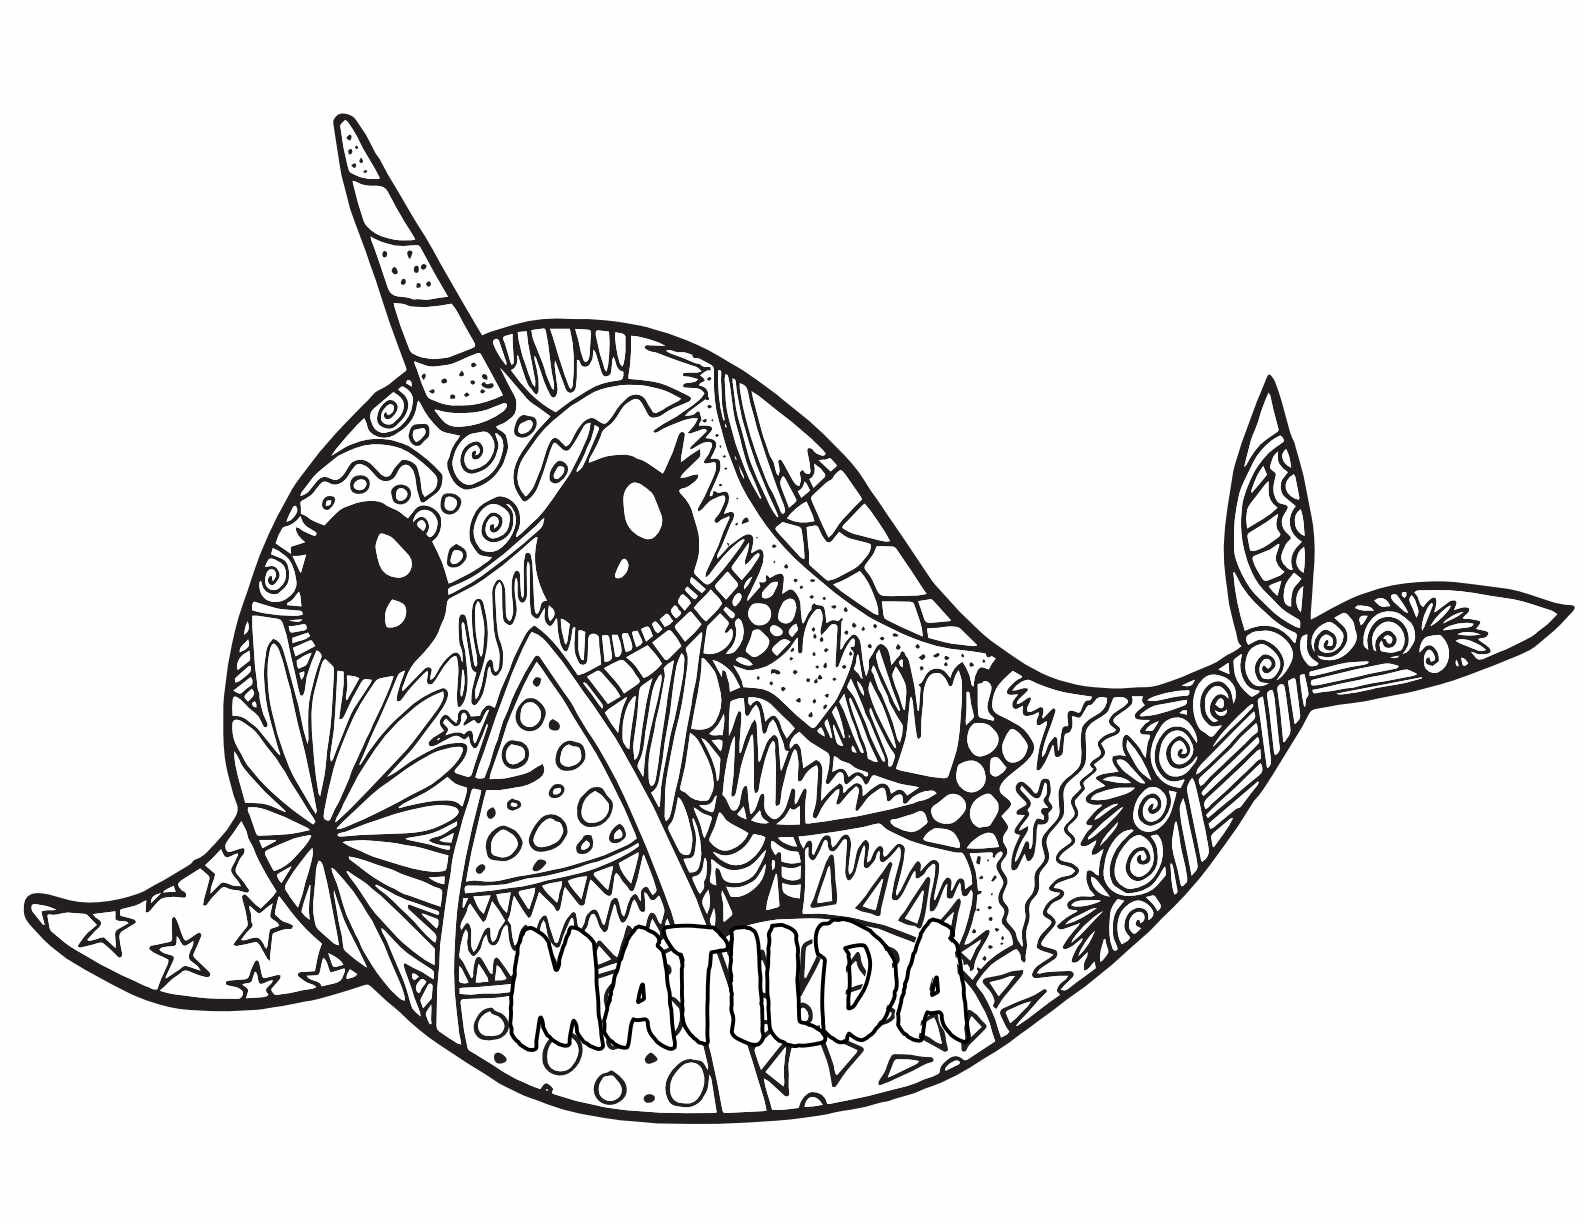 matilda-3-free-printable-coloring-pages-stevie-doodles